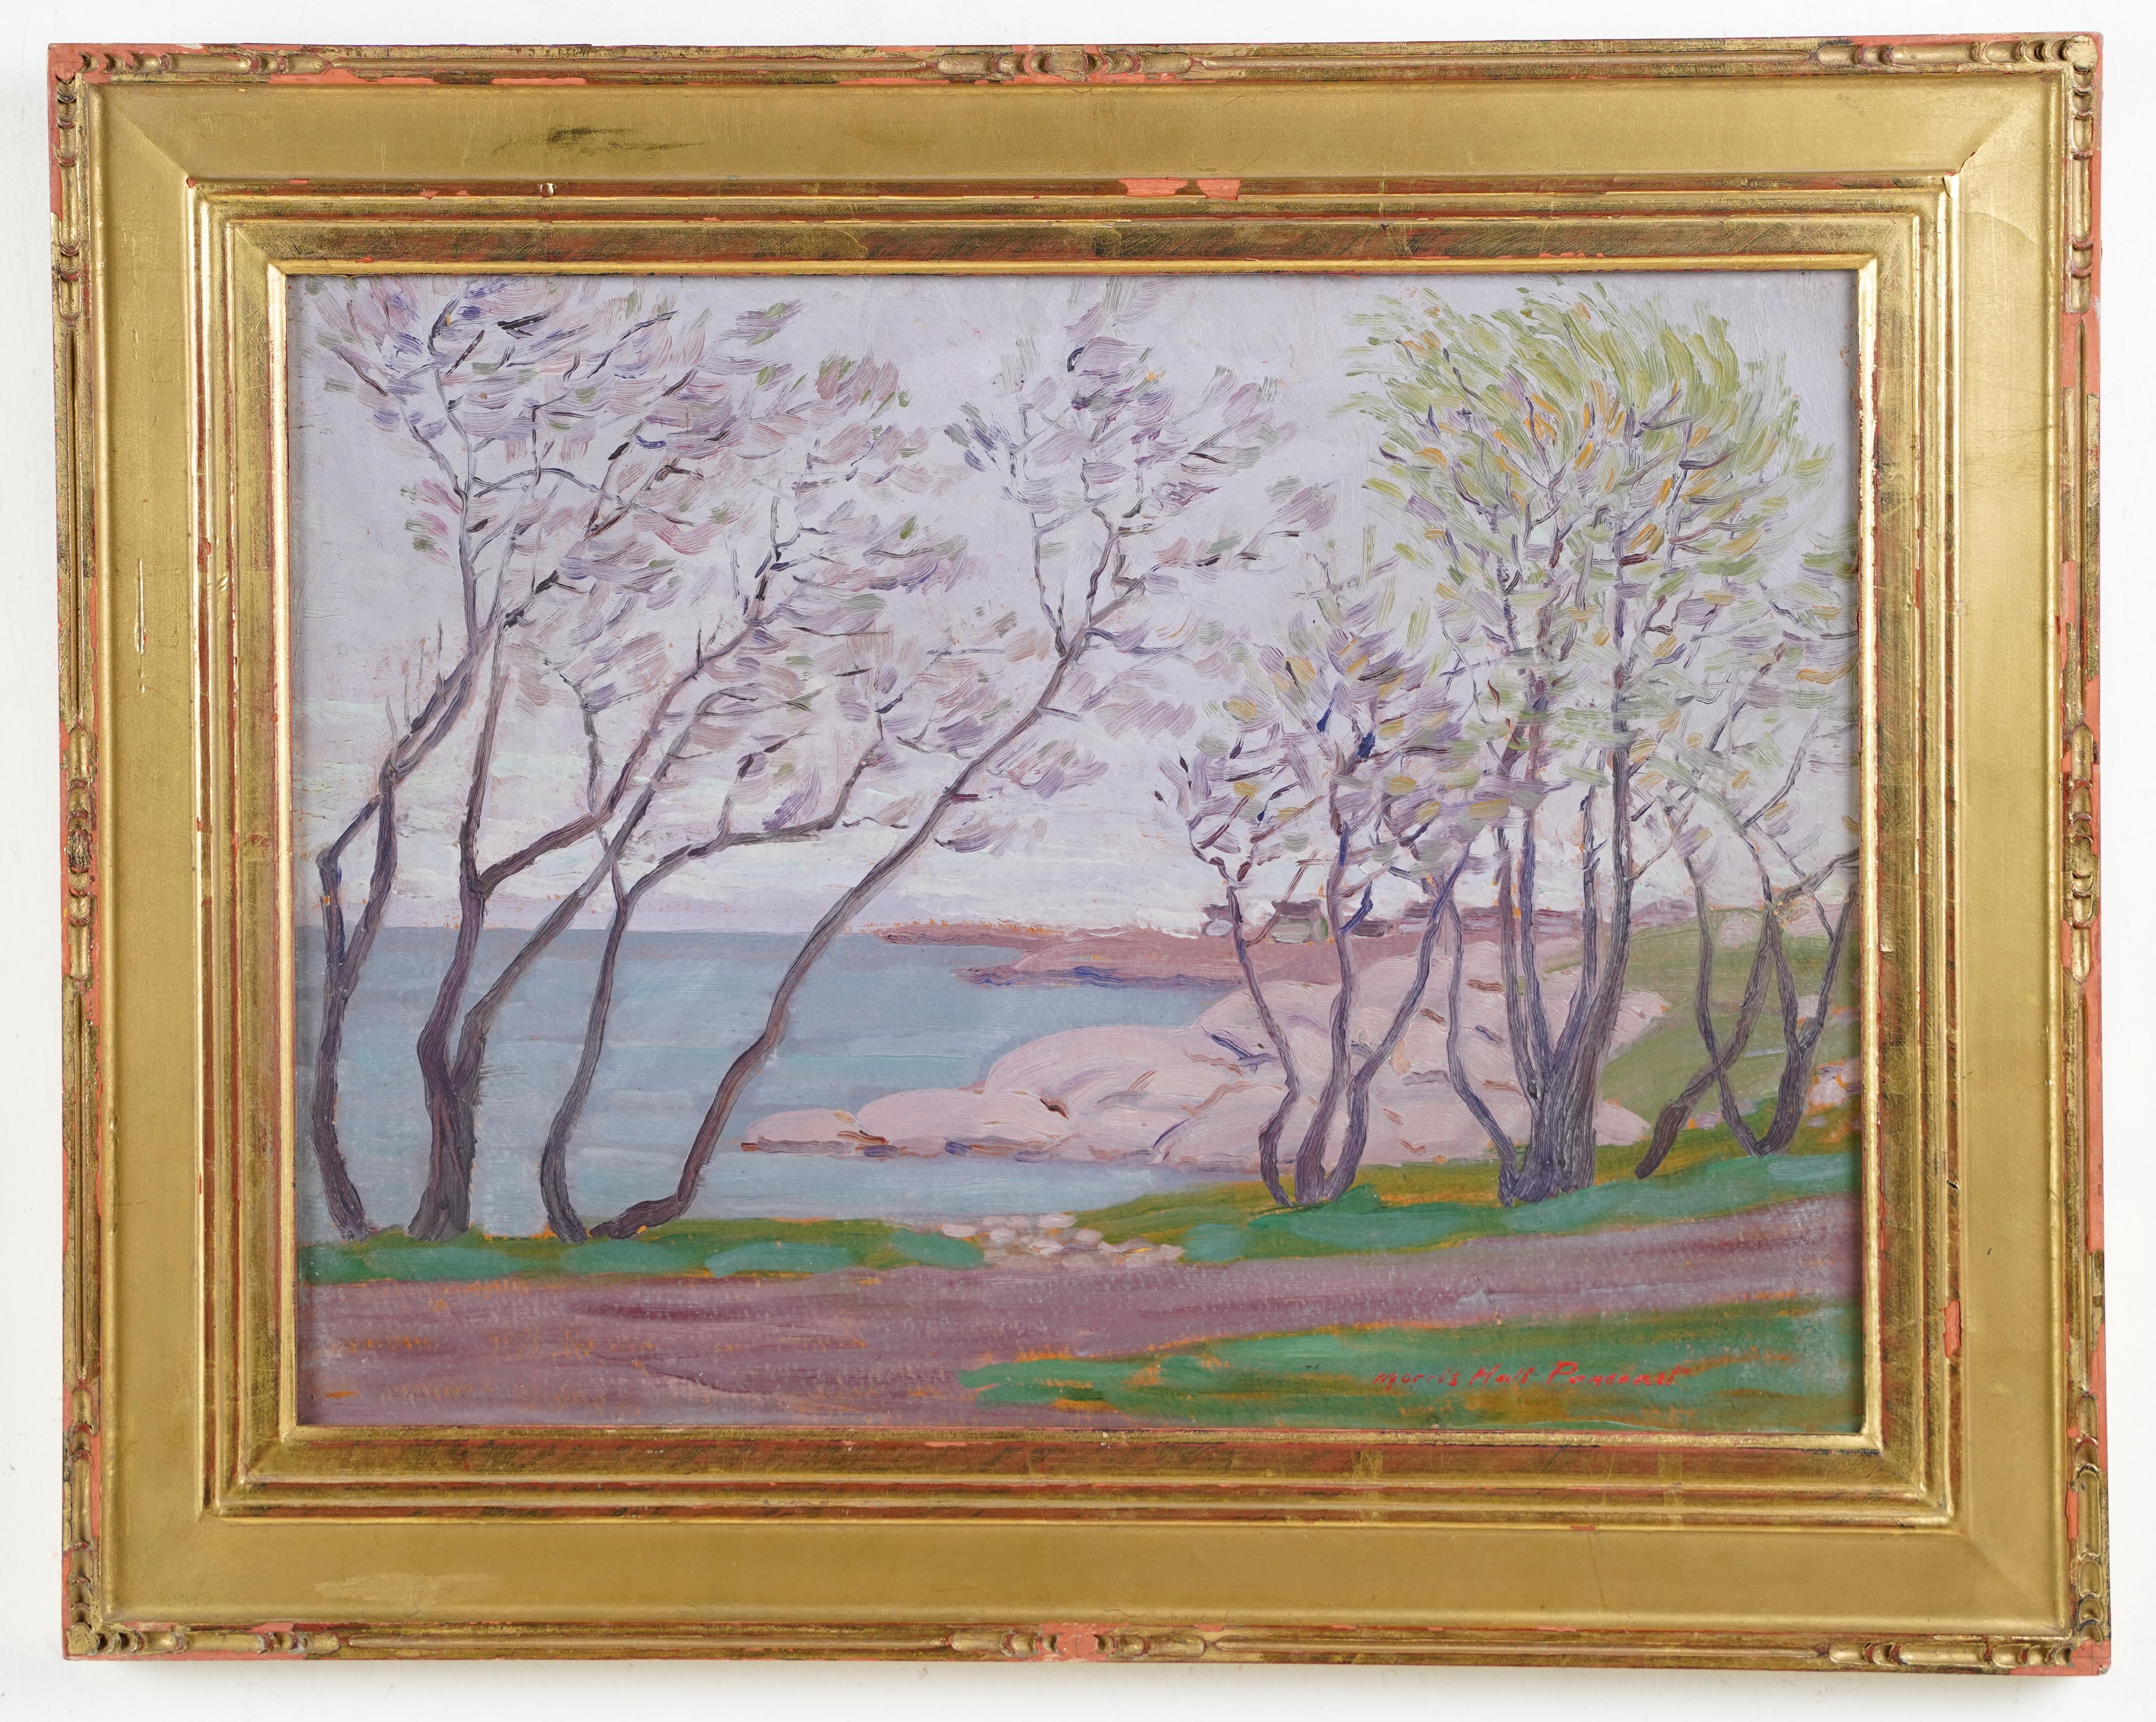  Antique American School Signed Gold Framed Impressionist Coastal Oil Painting - Brown Landscape Painting by Morris Hall Pancoast